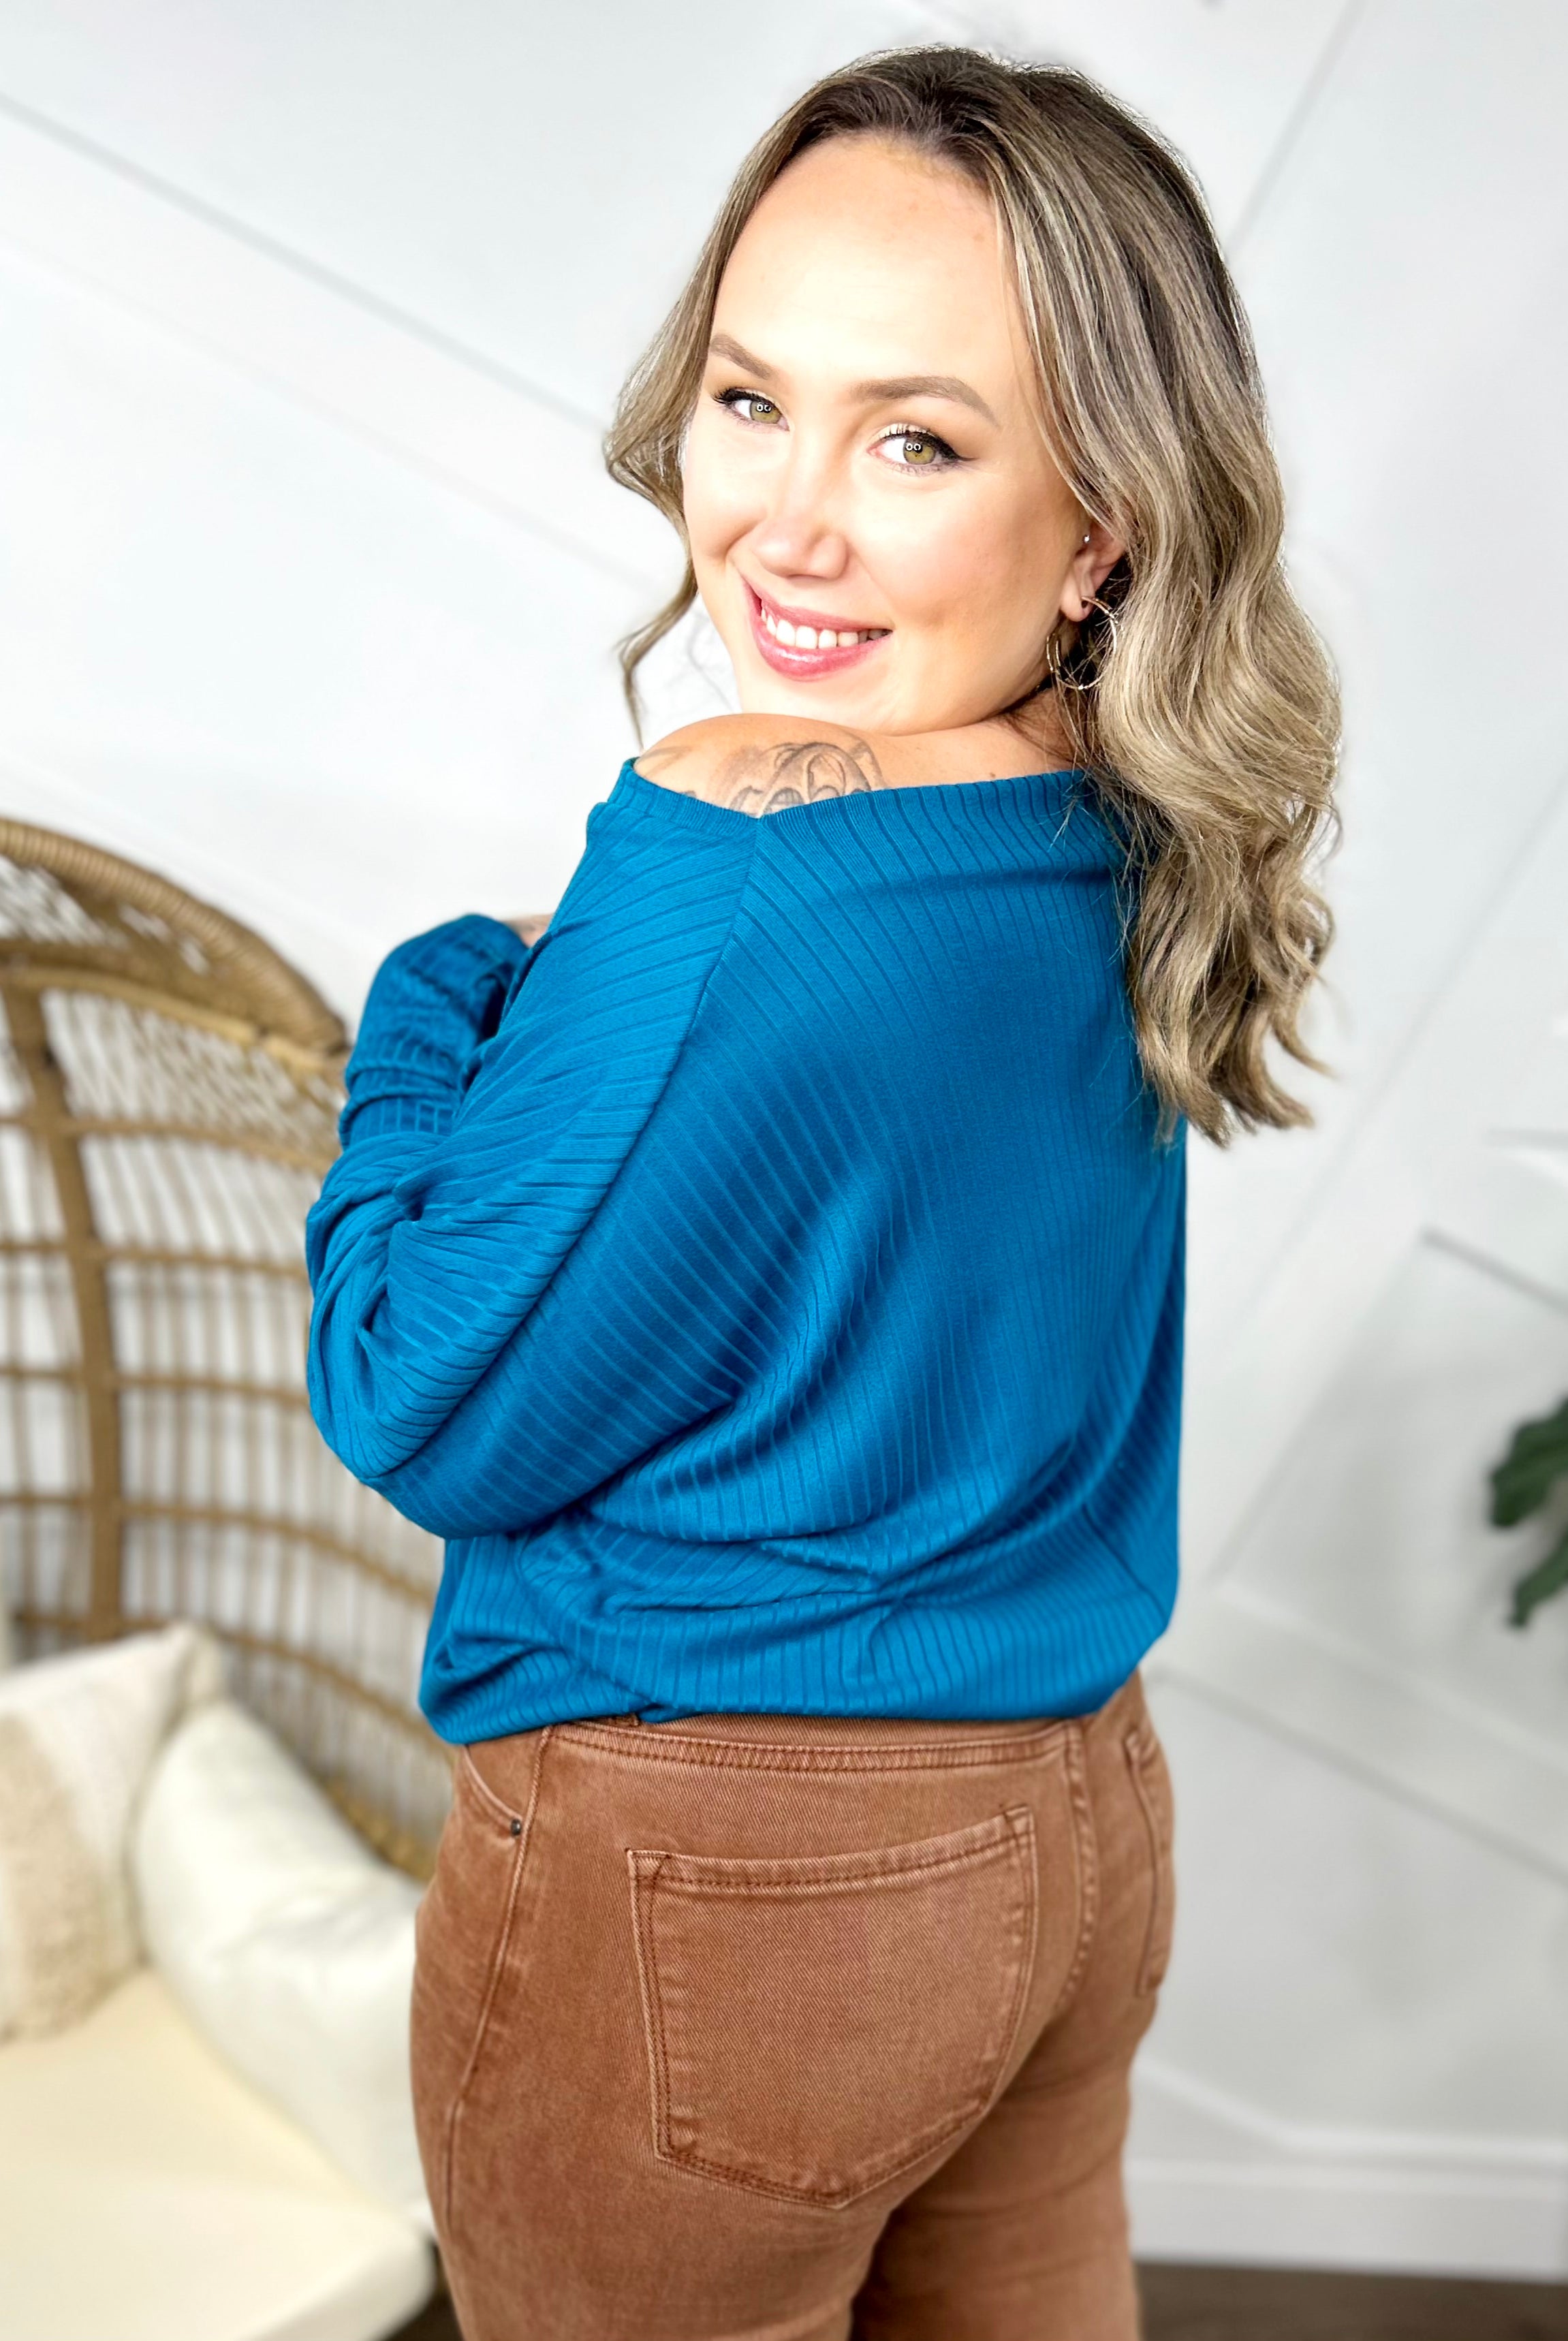 RESTOCK: Fire And Ice Top-120 Long Sleeve Tops-White Birch-Heathered Boho Boutique, Women's Fashion and Accessories in Palmetto, FL